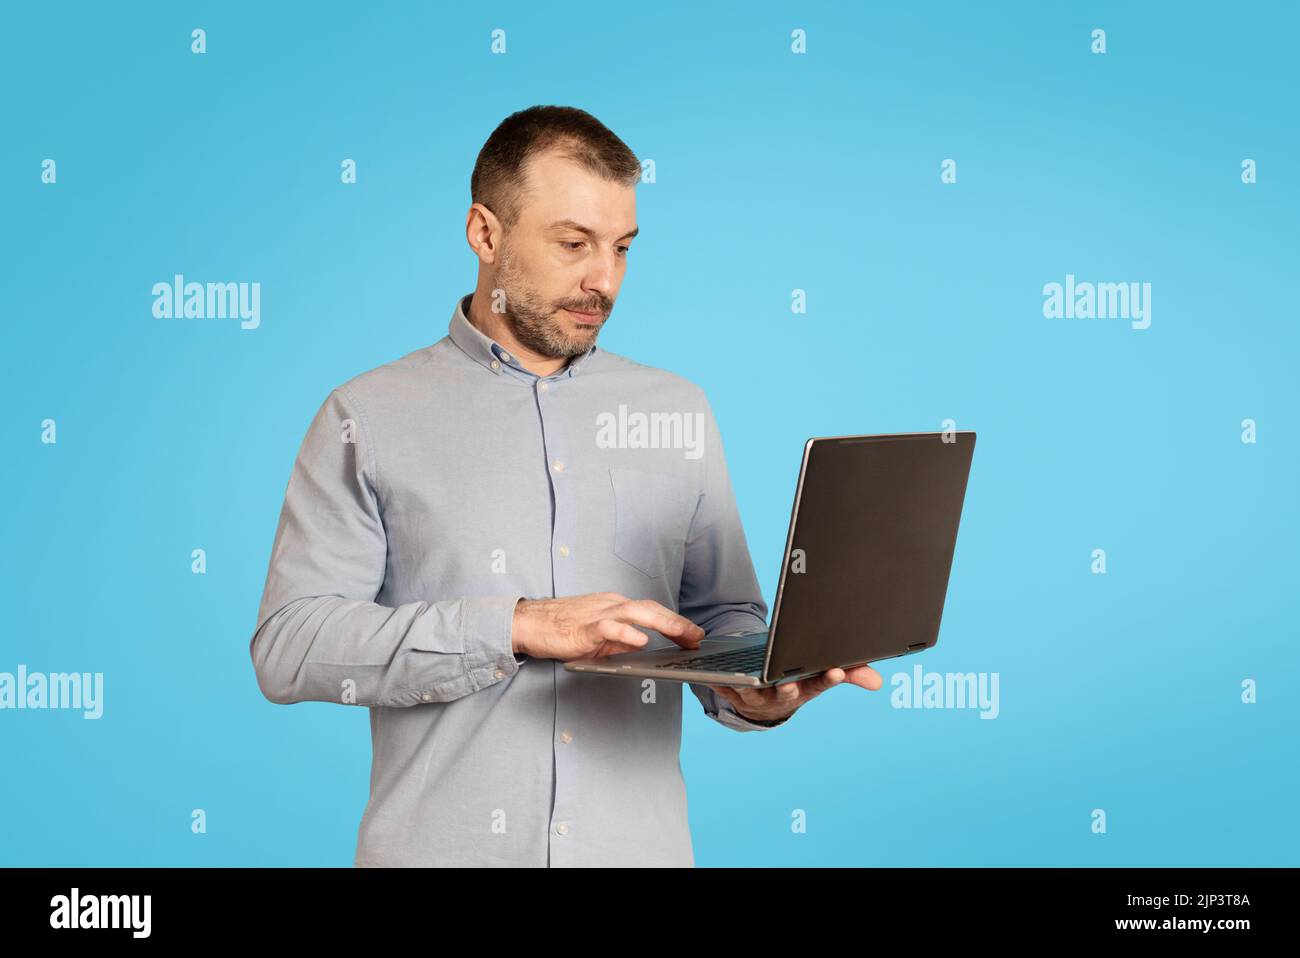 Middle Aged Businessman Using Laptop Computer Working Online, Blue Background Stock Photo